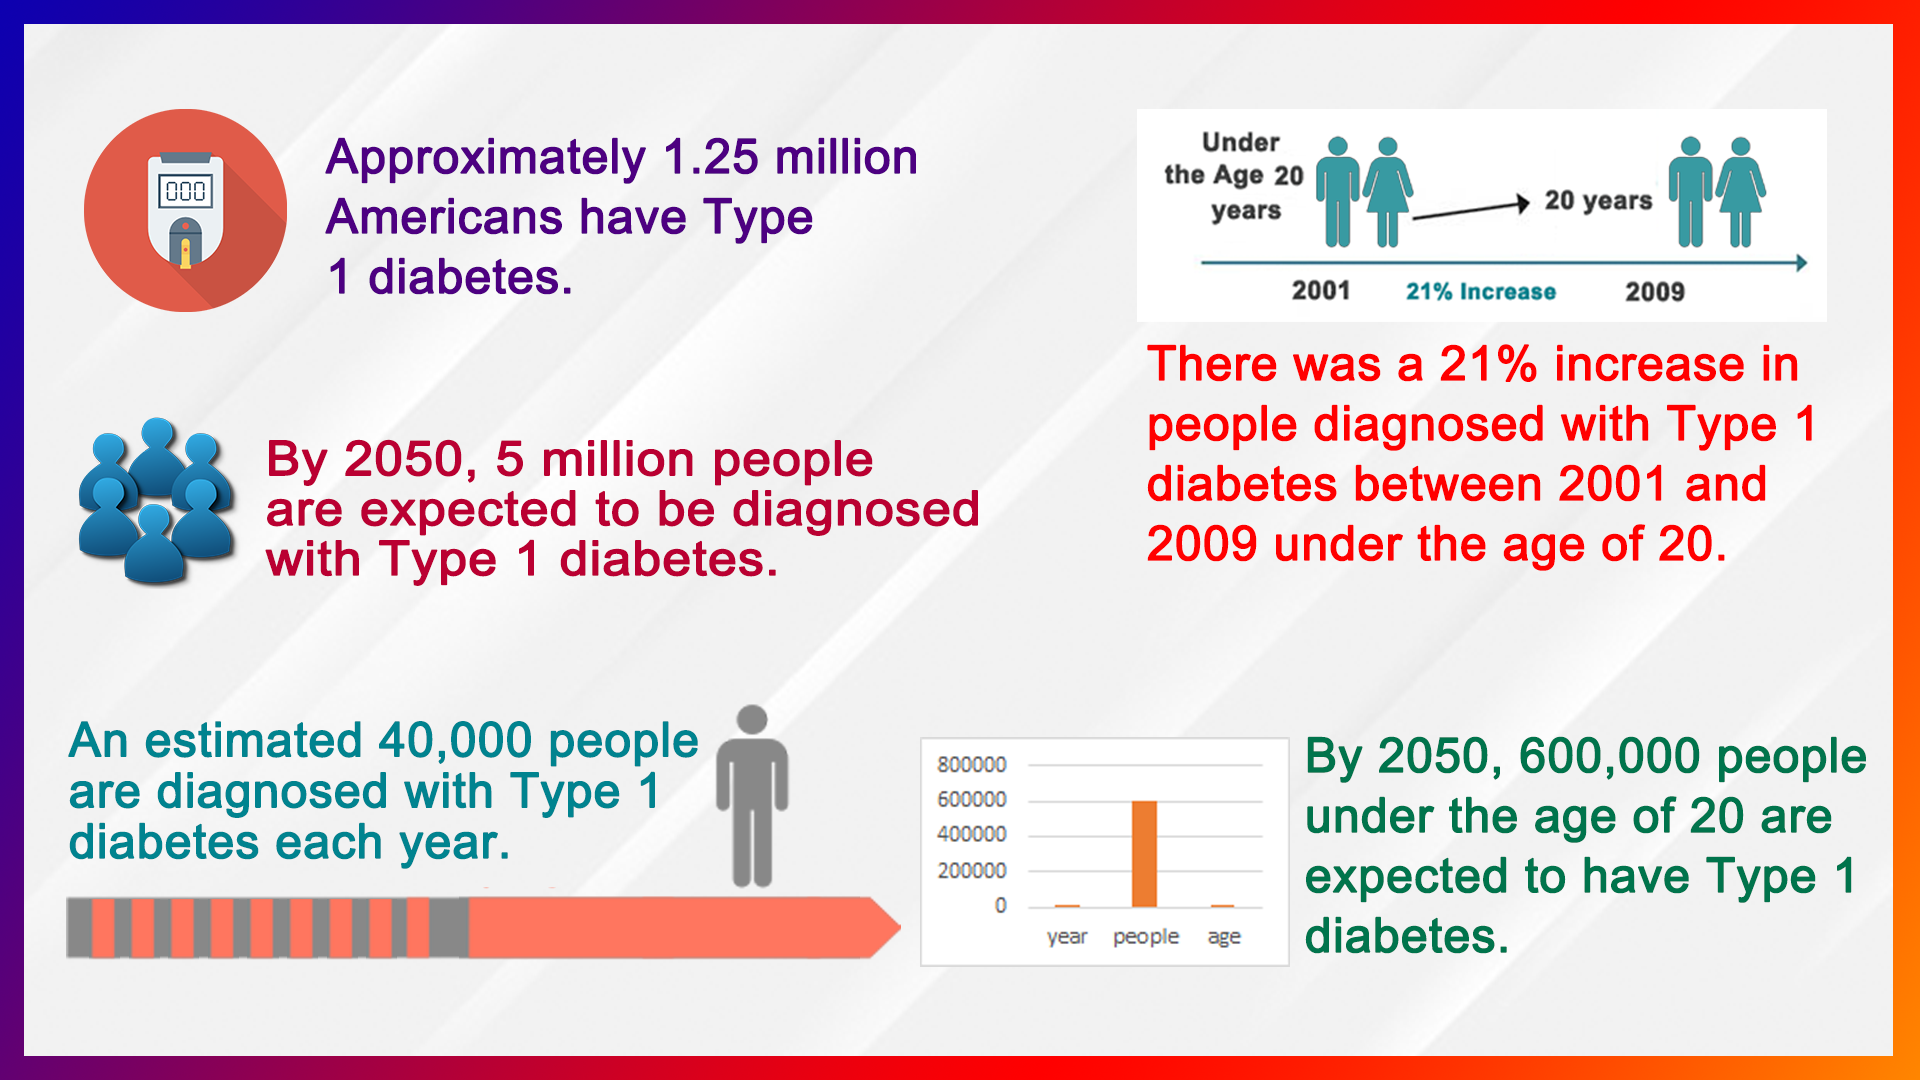 Type 1 diabetes facts in figures in USA